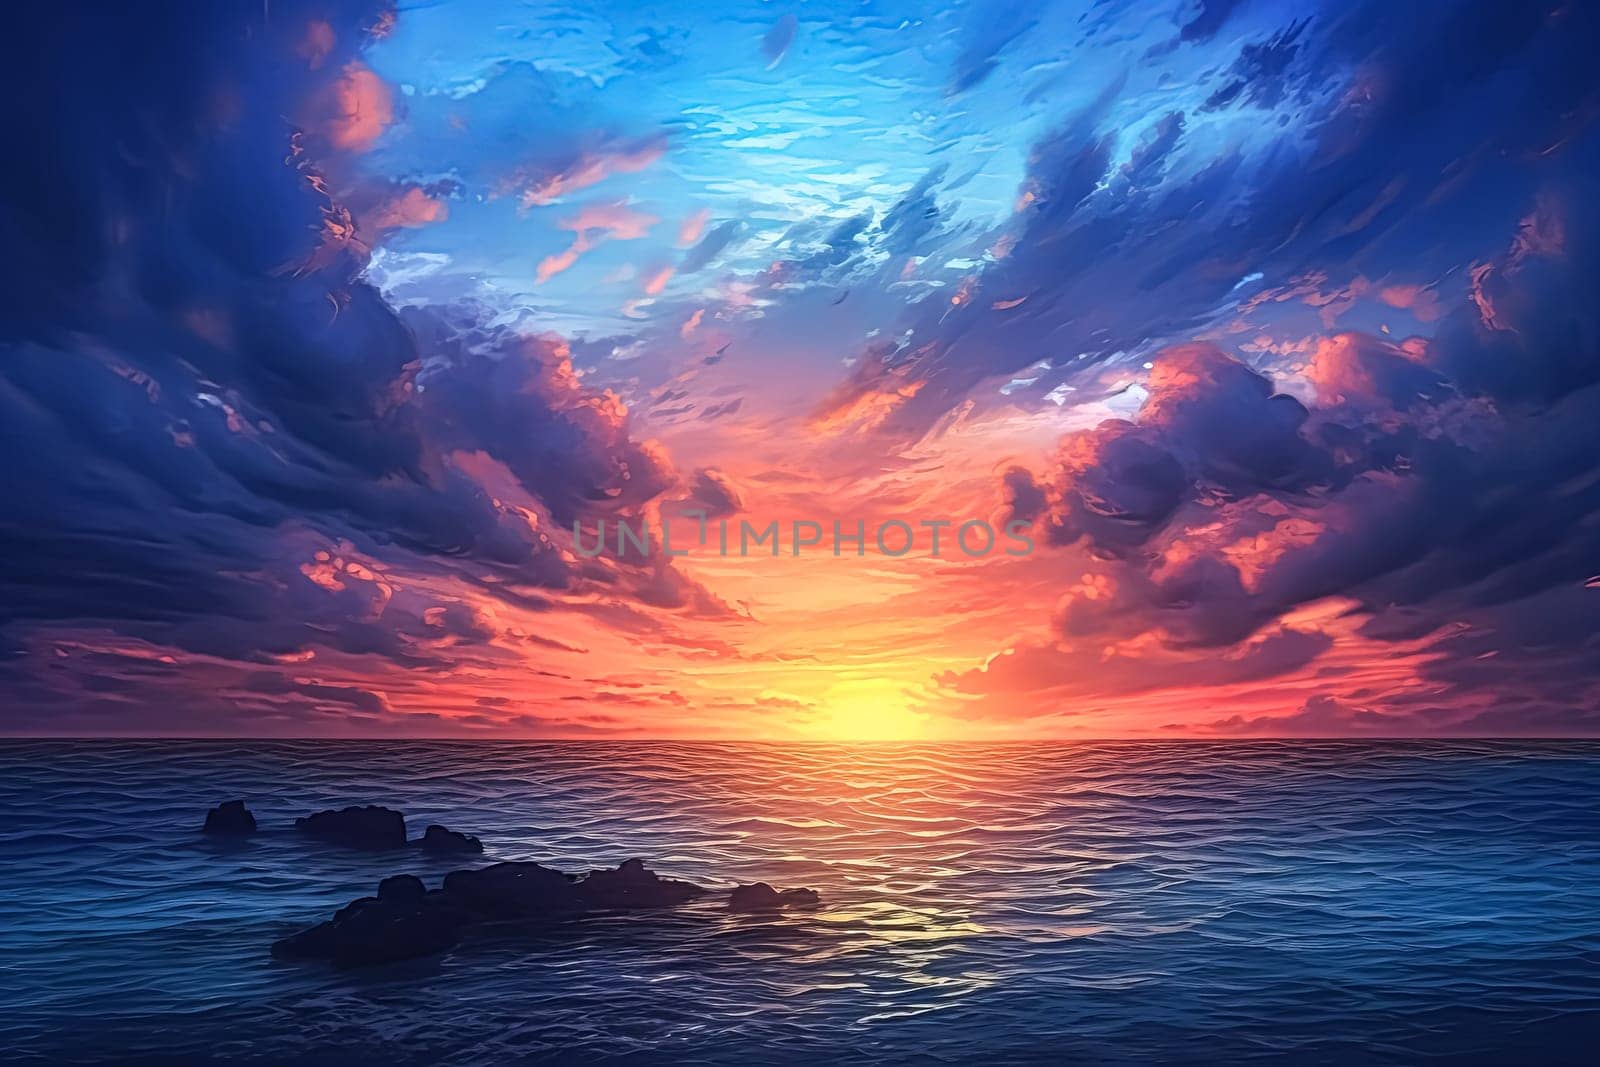 A beautiful sunset over the ocean with a few clouds in the sky. The sky is a mix of blue and pink colors